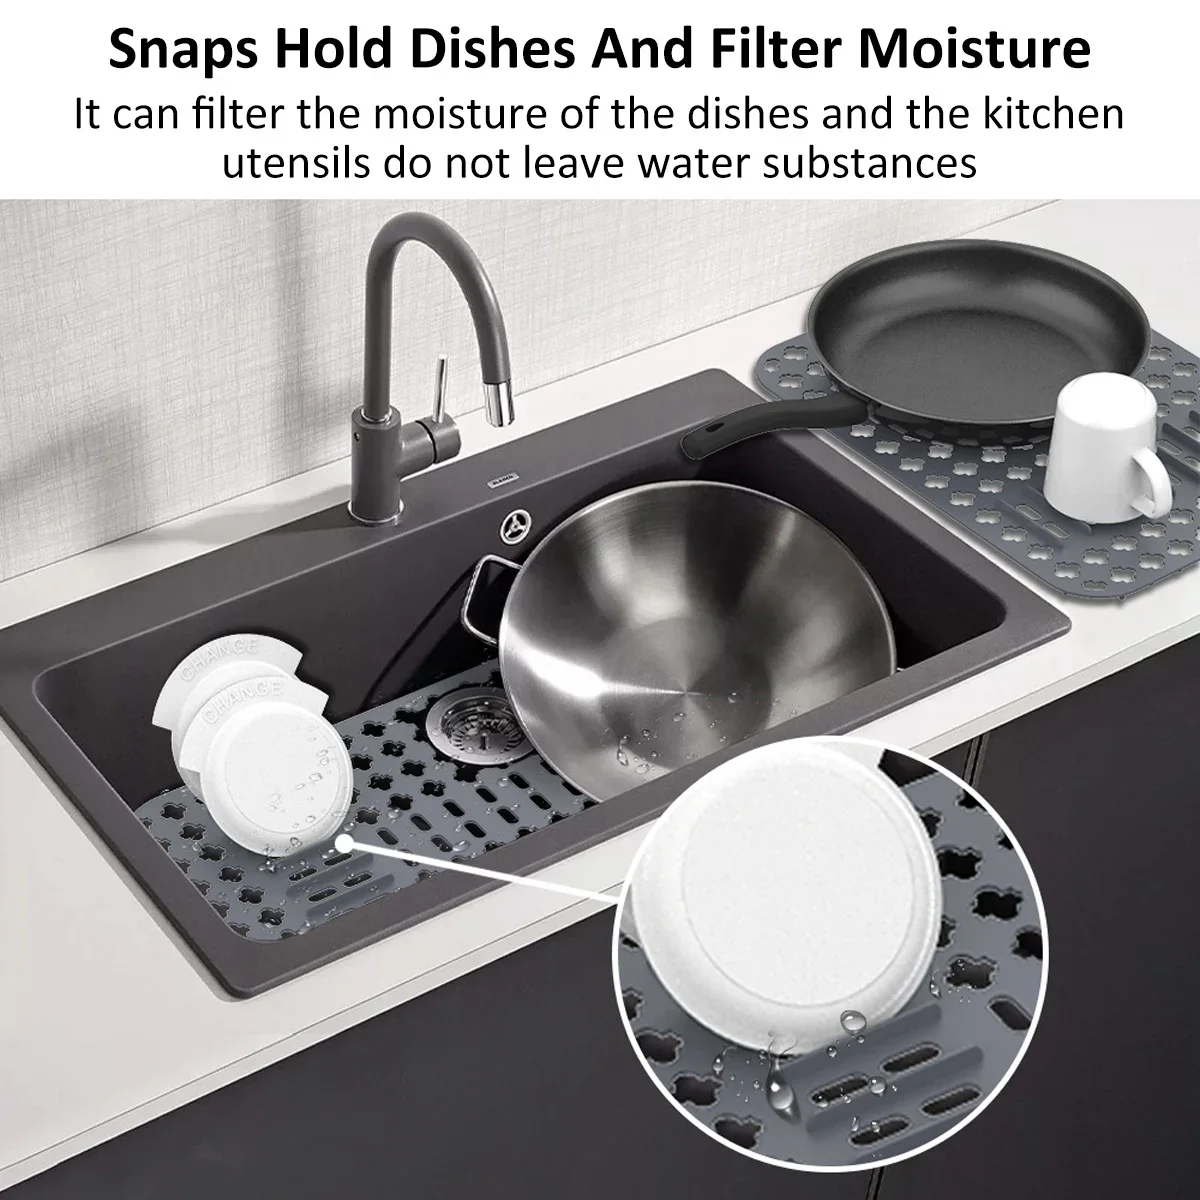 https://ae01.alicdn.com/kf/See3ac17a4e2c48a4b18974ad8b0bbdfdE/Silicone-Sink-Protector-Non-slip-Grey-Sink-Mat-for-Bottom-Heat-Resistant-Grid-Tableware-Dish-Drying.jpg